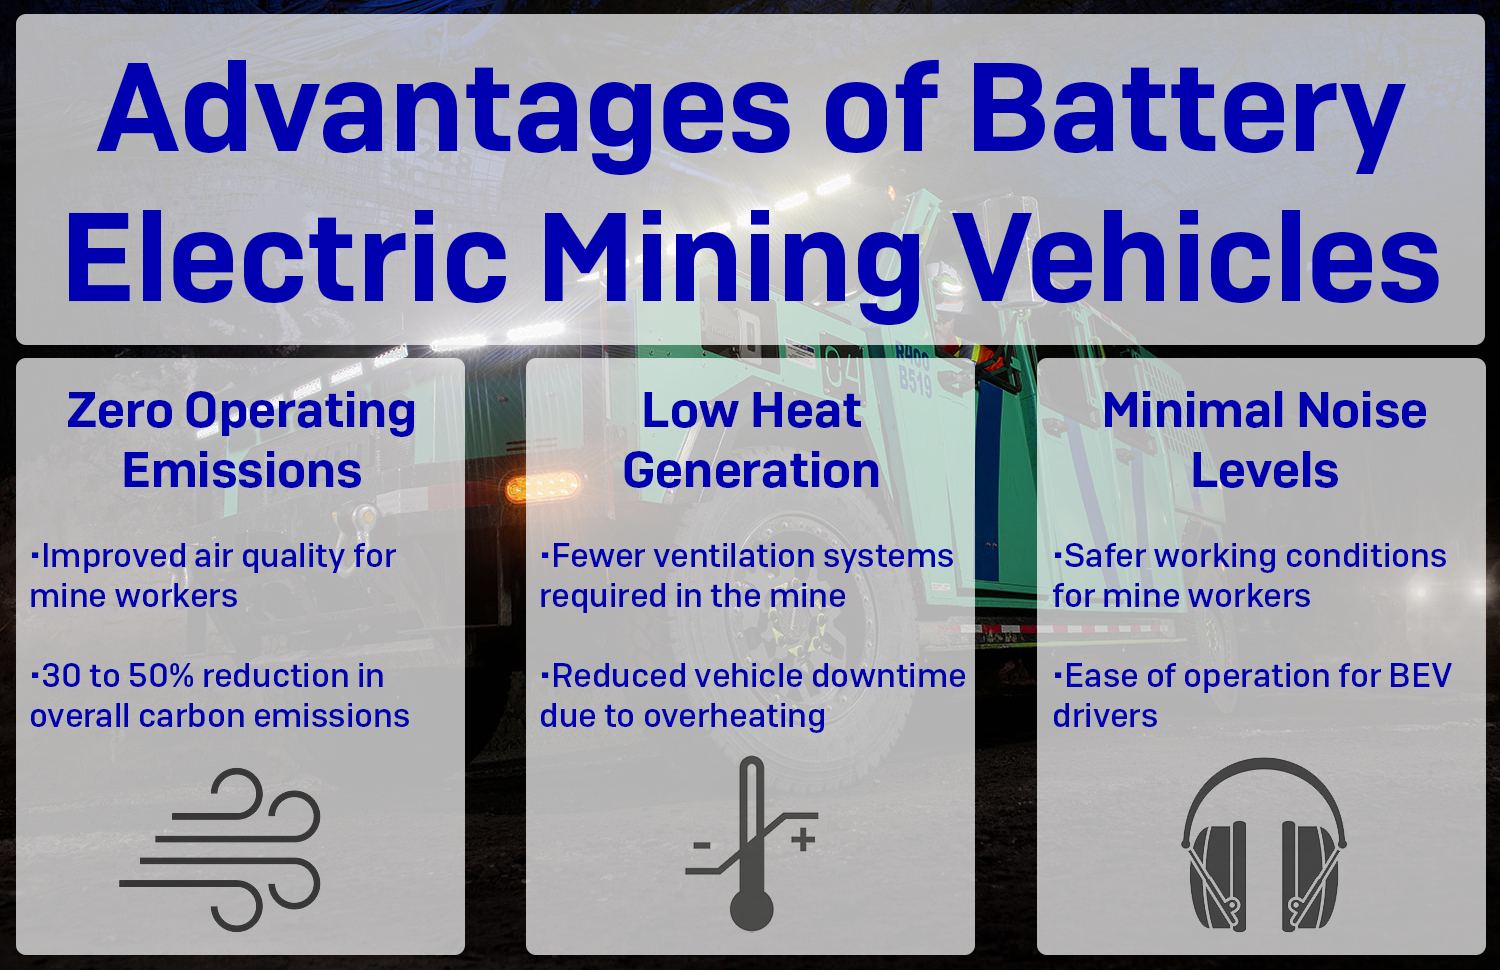 Advantages of Battery Electric Mining Vehicles